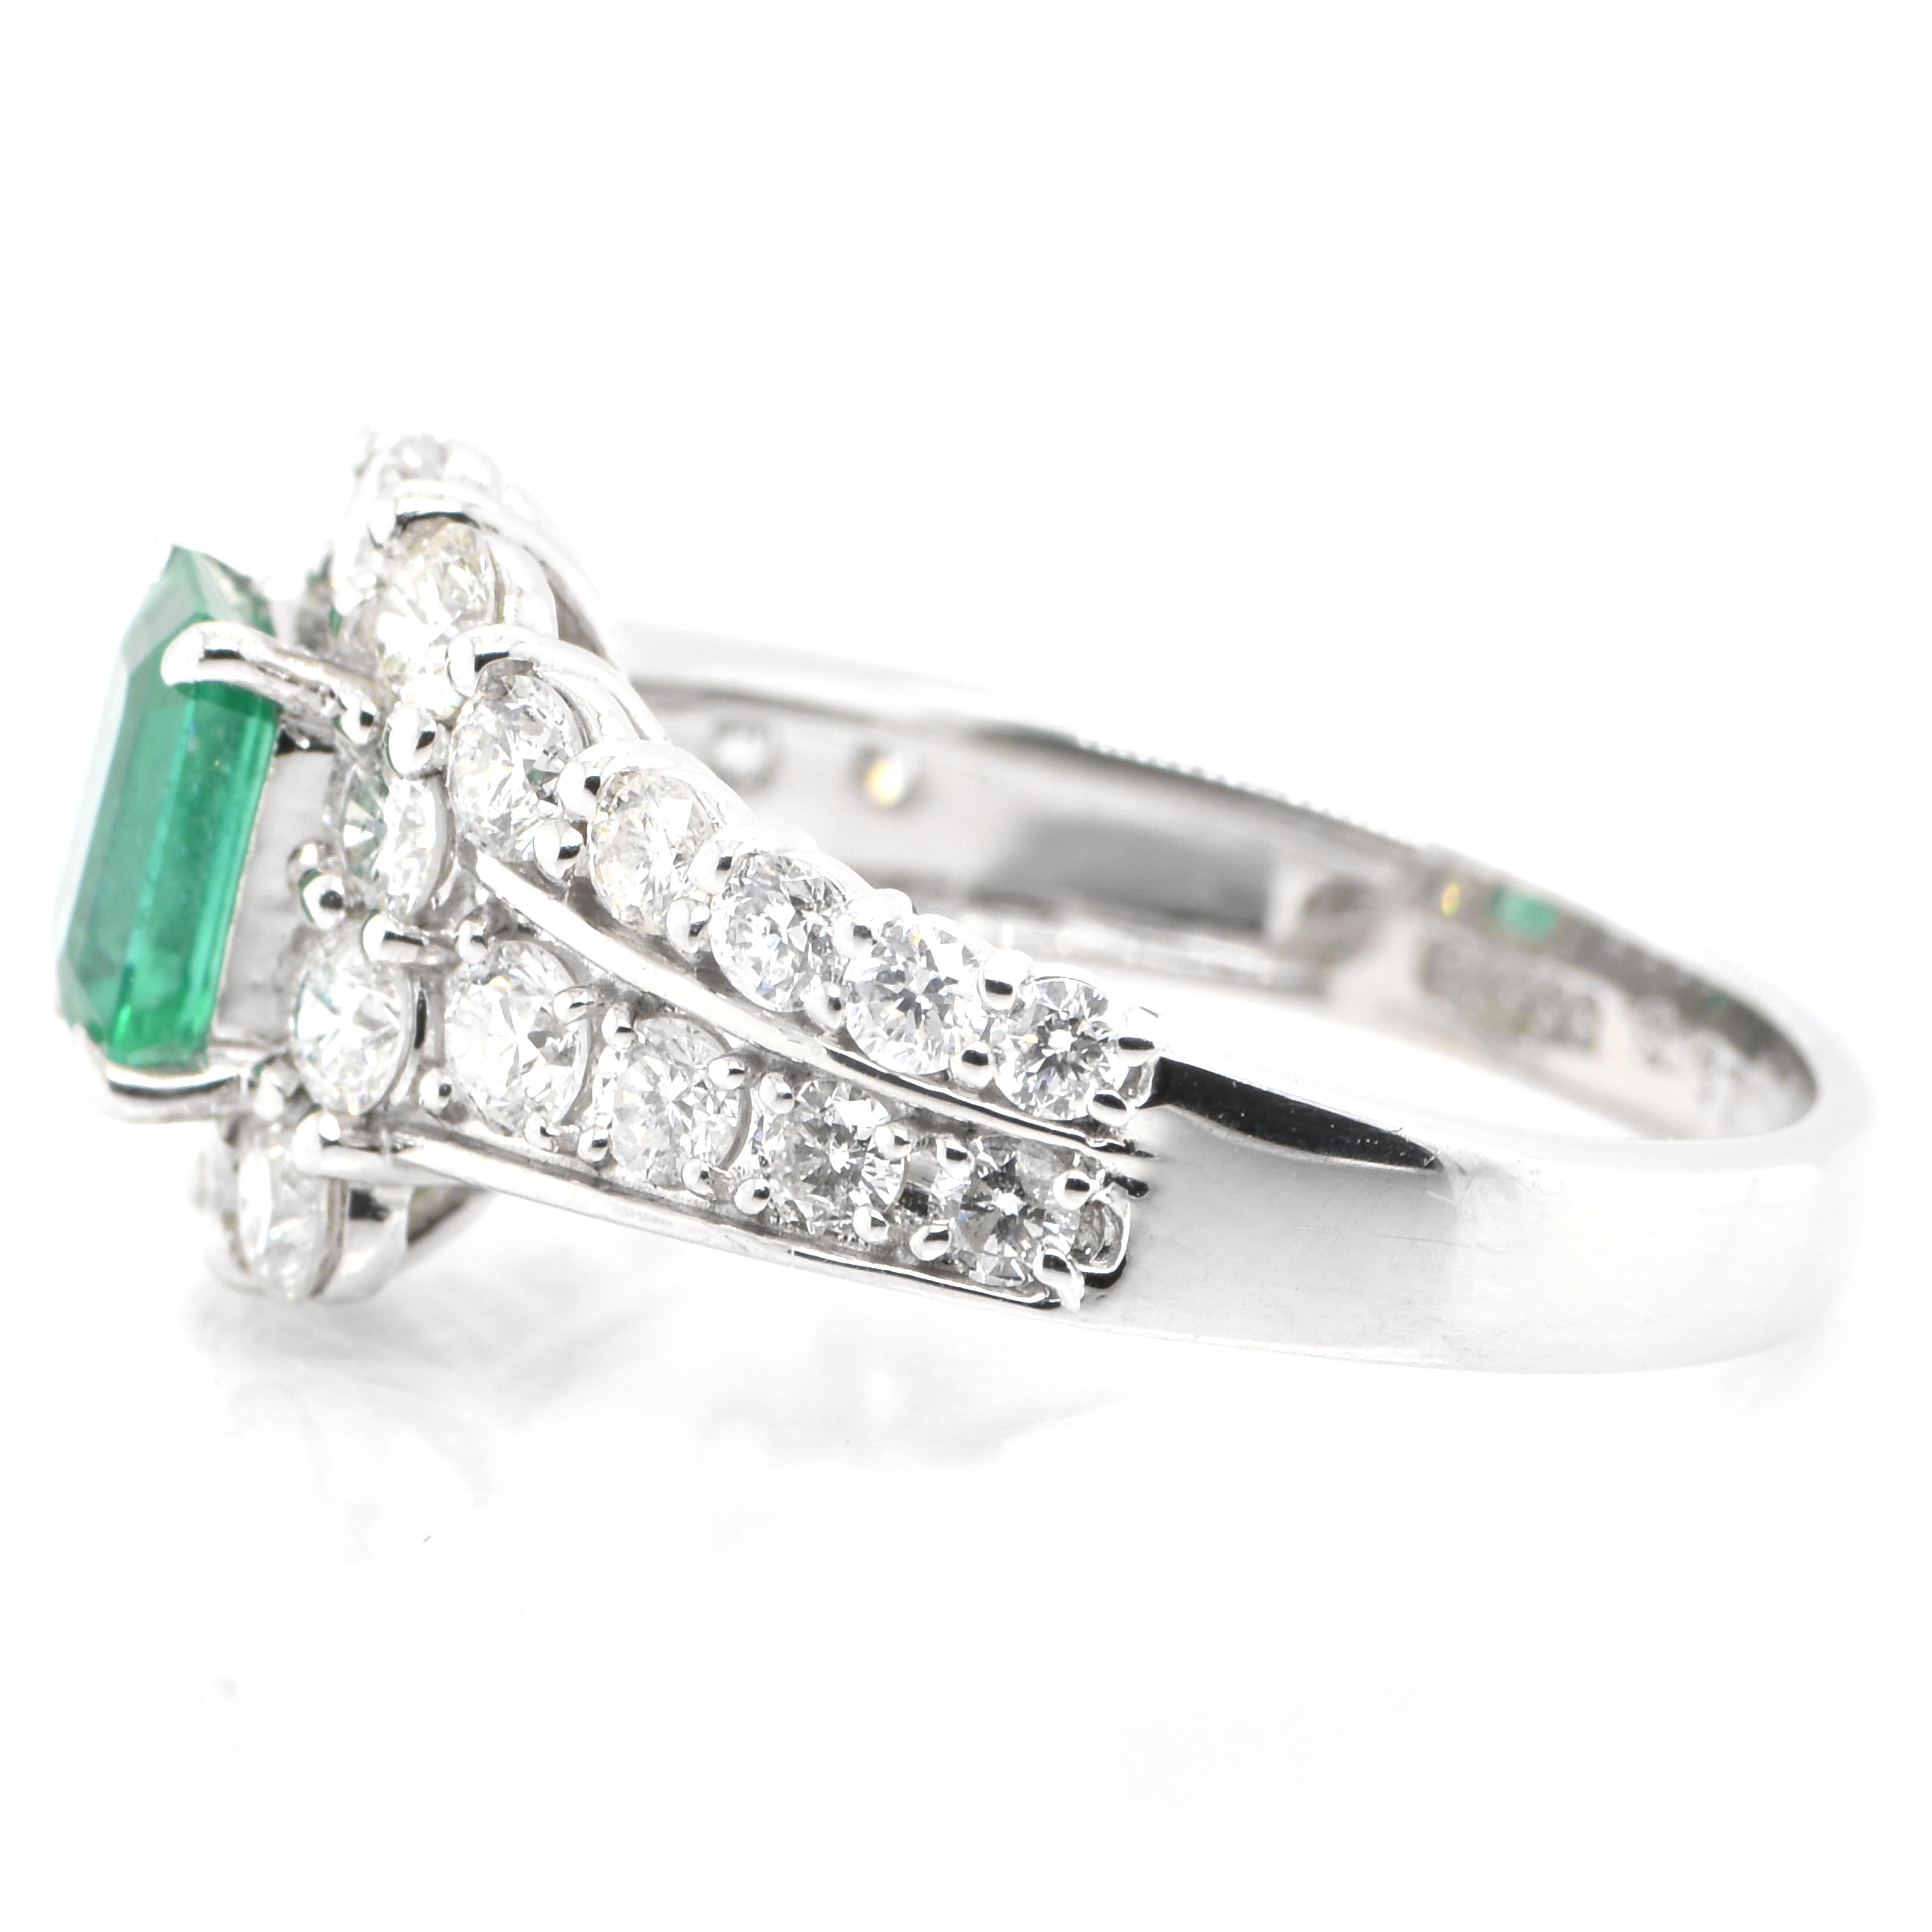 Modern 0.87 Carat Natural Emerald and Diamond Ring Set in Platinum For Sale